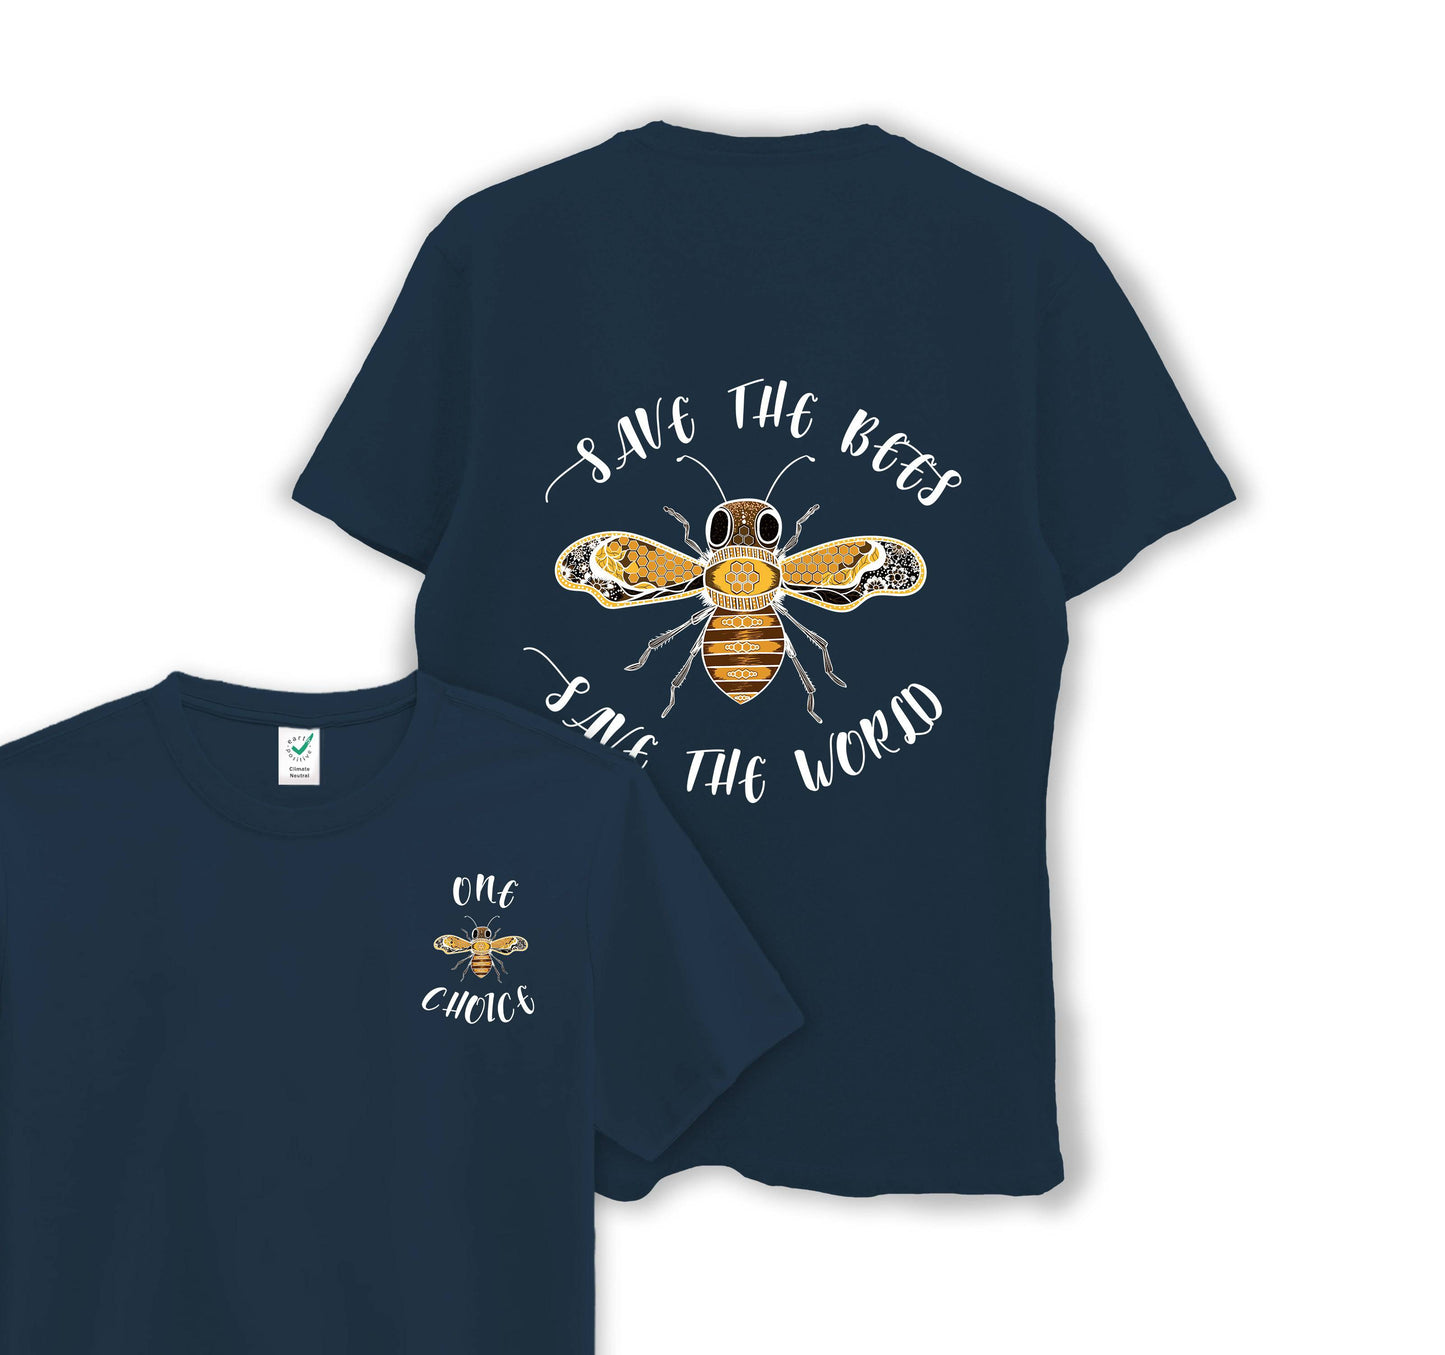 Save The Bees, Save The World- Organic Cotton Tee - One Choice Apparel